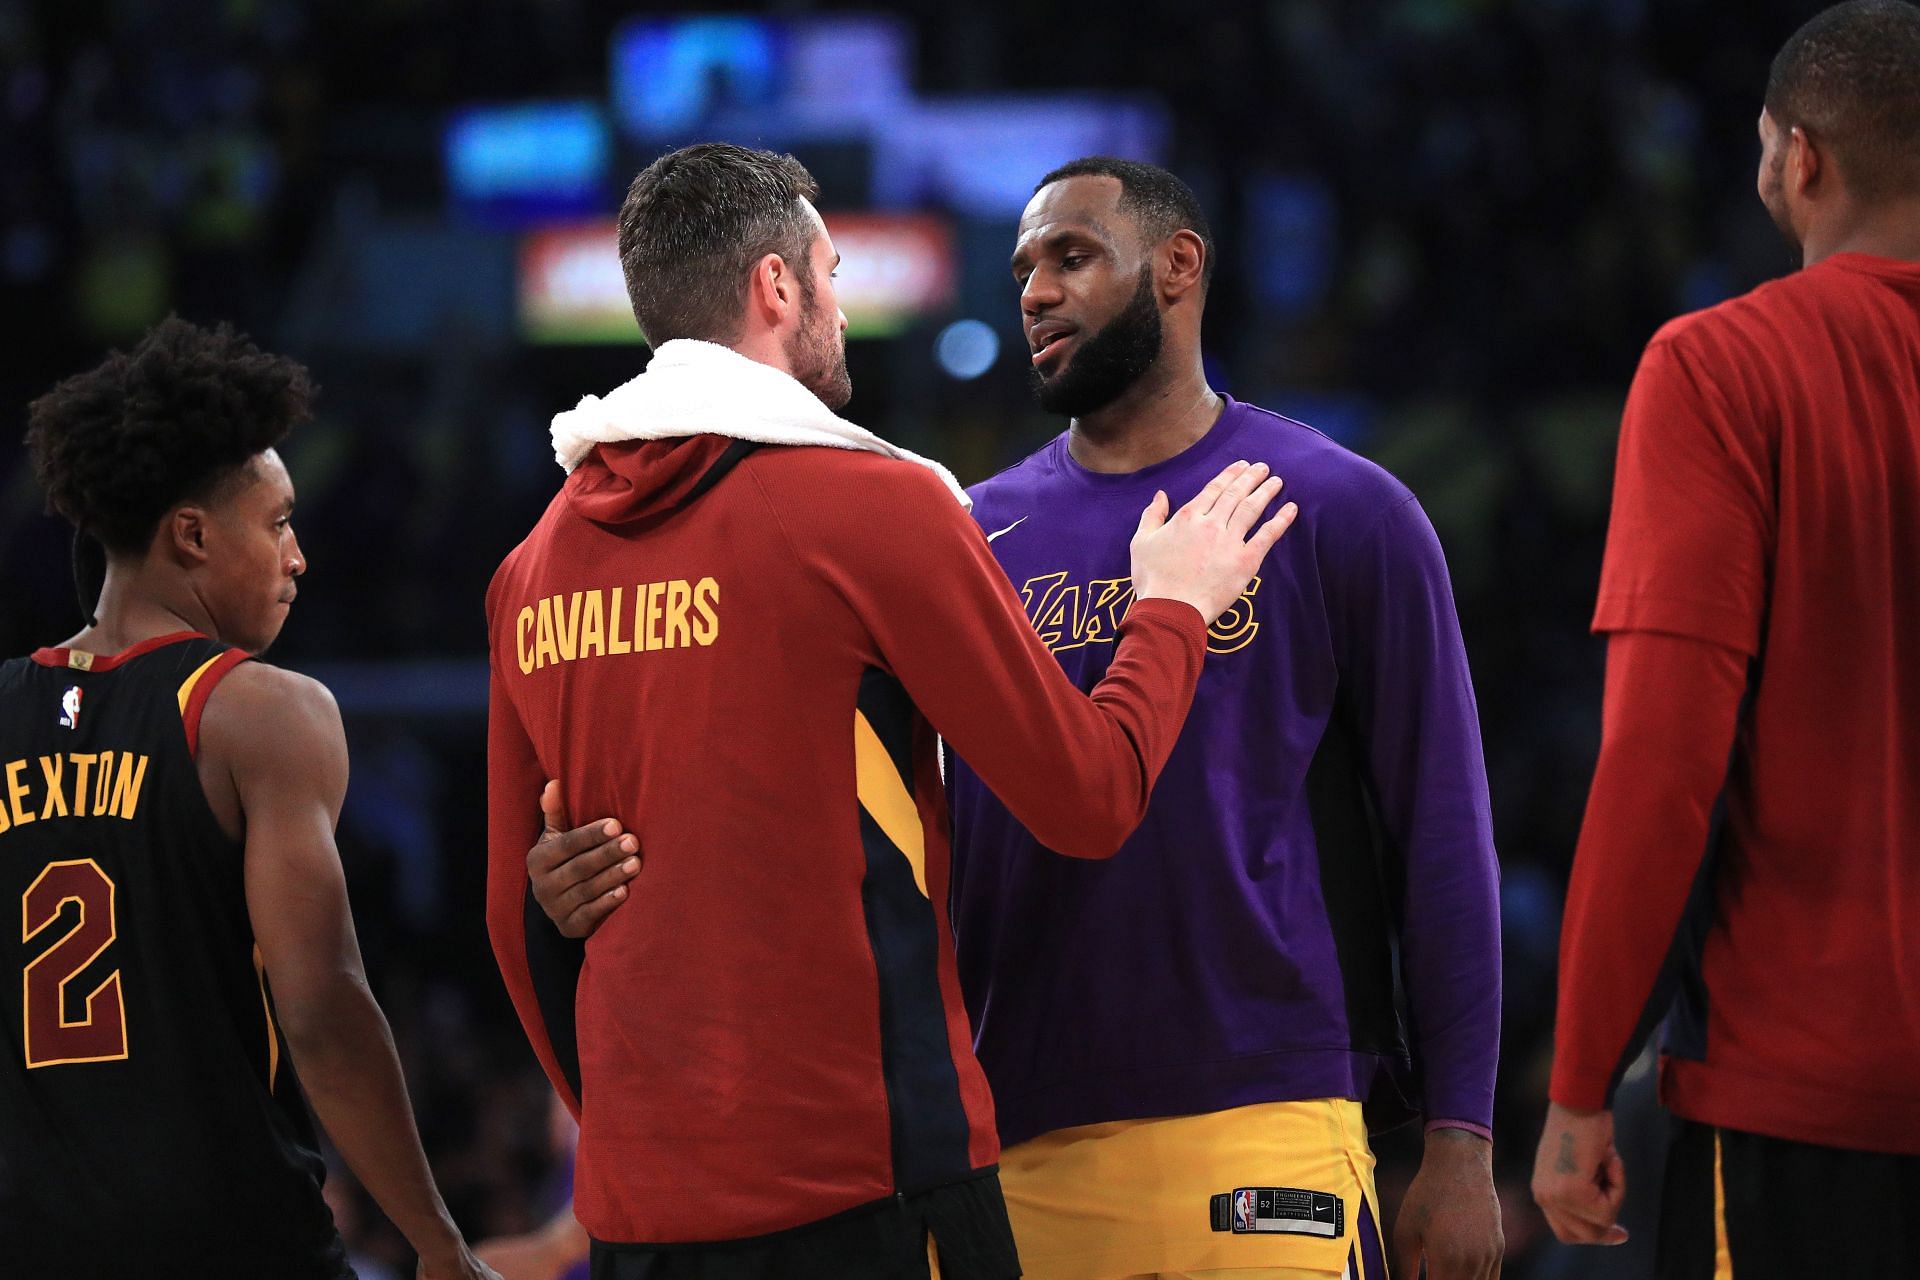 LA Lakers News Roundup: LeBron James wishes former teammate Kevin Love on his wedding day, Russell Westbrook celebrates new contract with Kevin Hart, and more - June 30, 2022